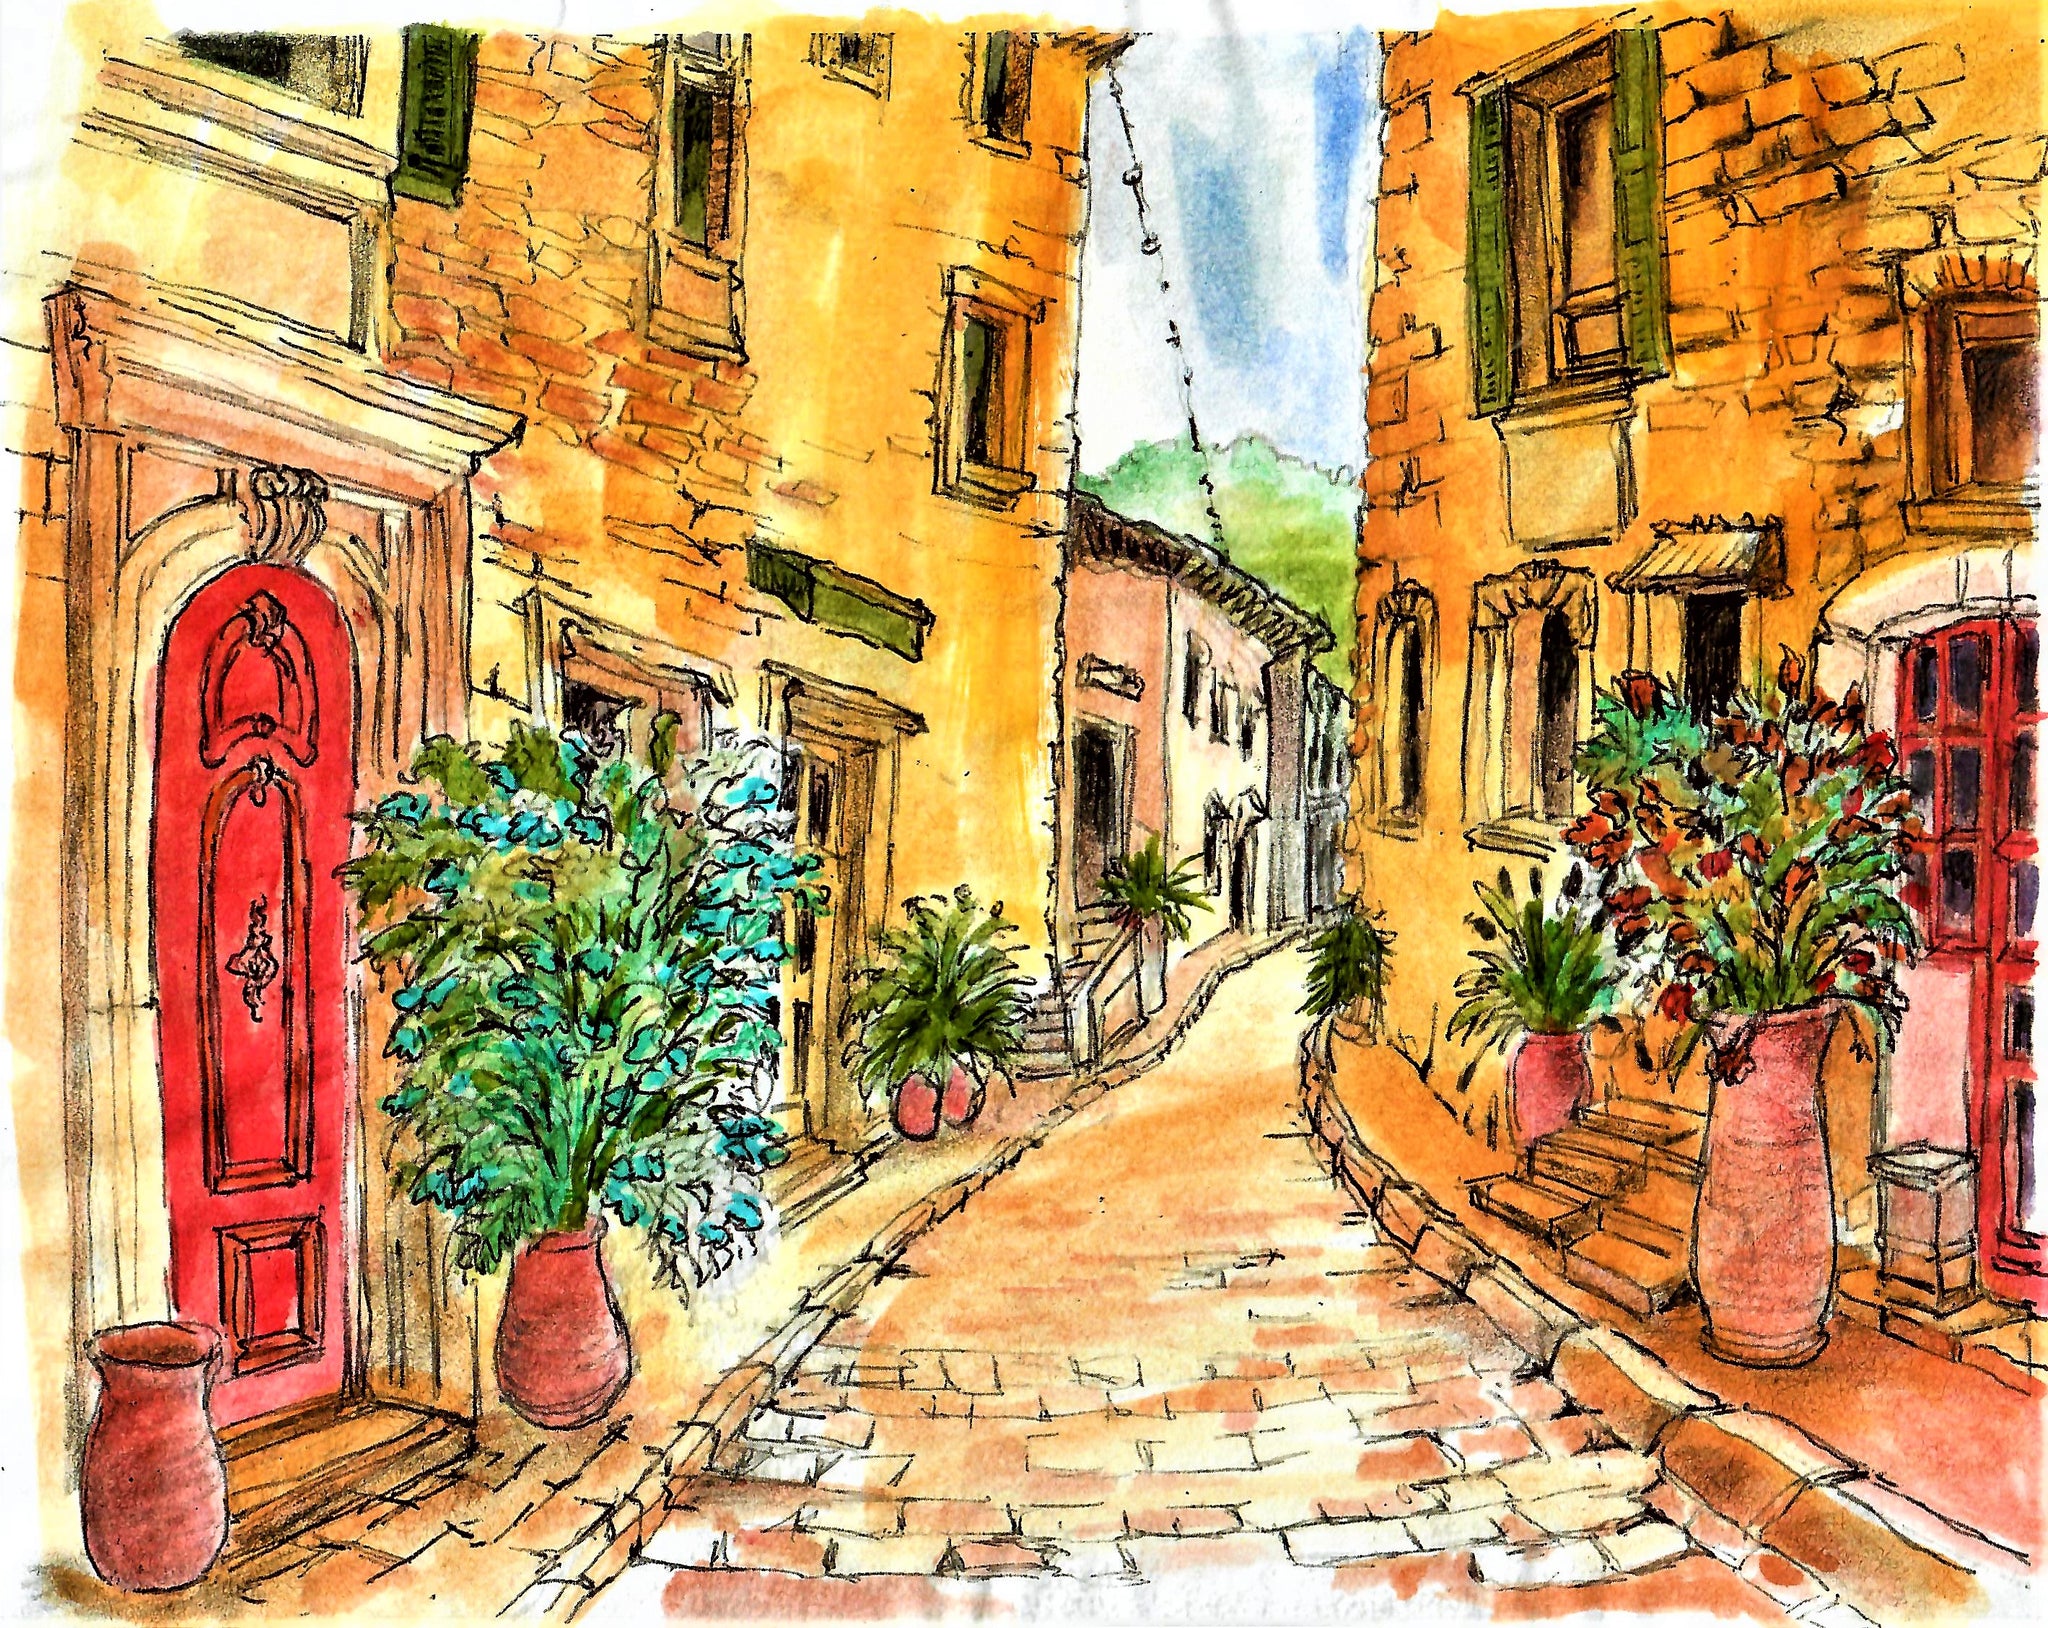 CITIES - ITALIAN VILLAGE WITH PAVED STONE ALLEY, BEAUTIFUL DOORS AND FLOWER POTS